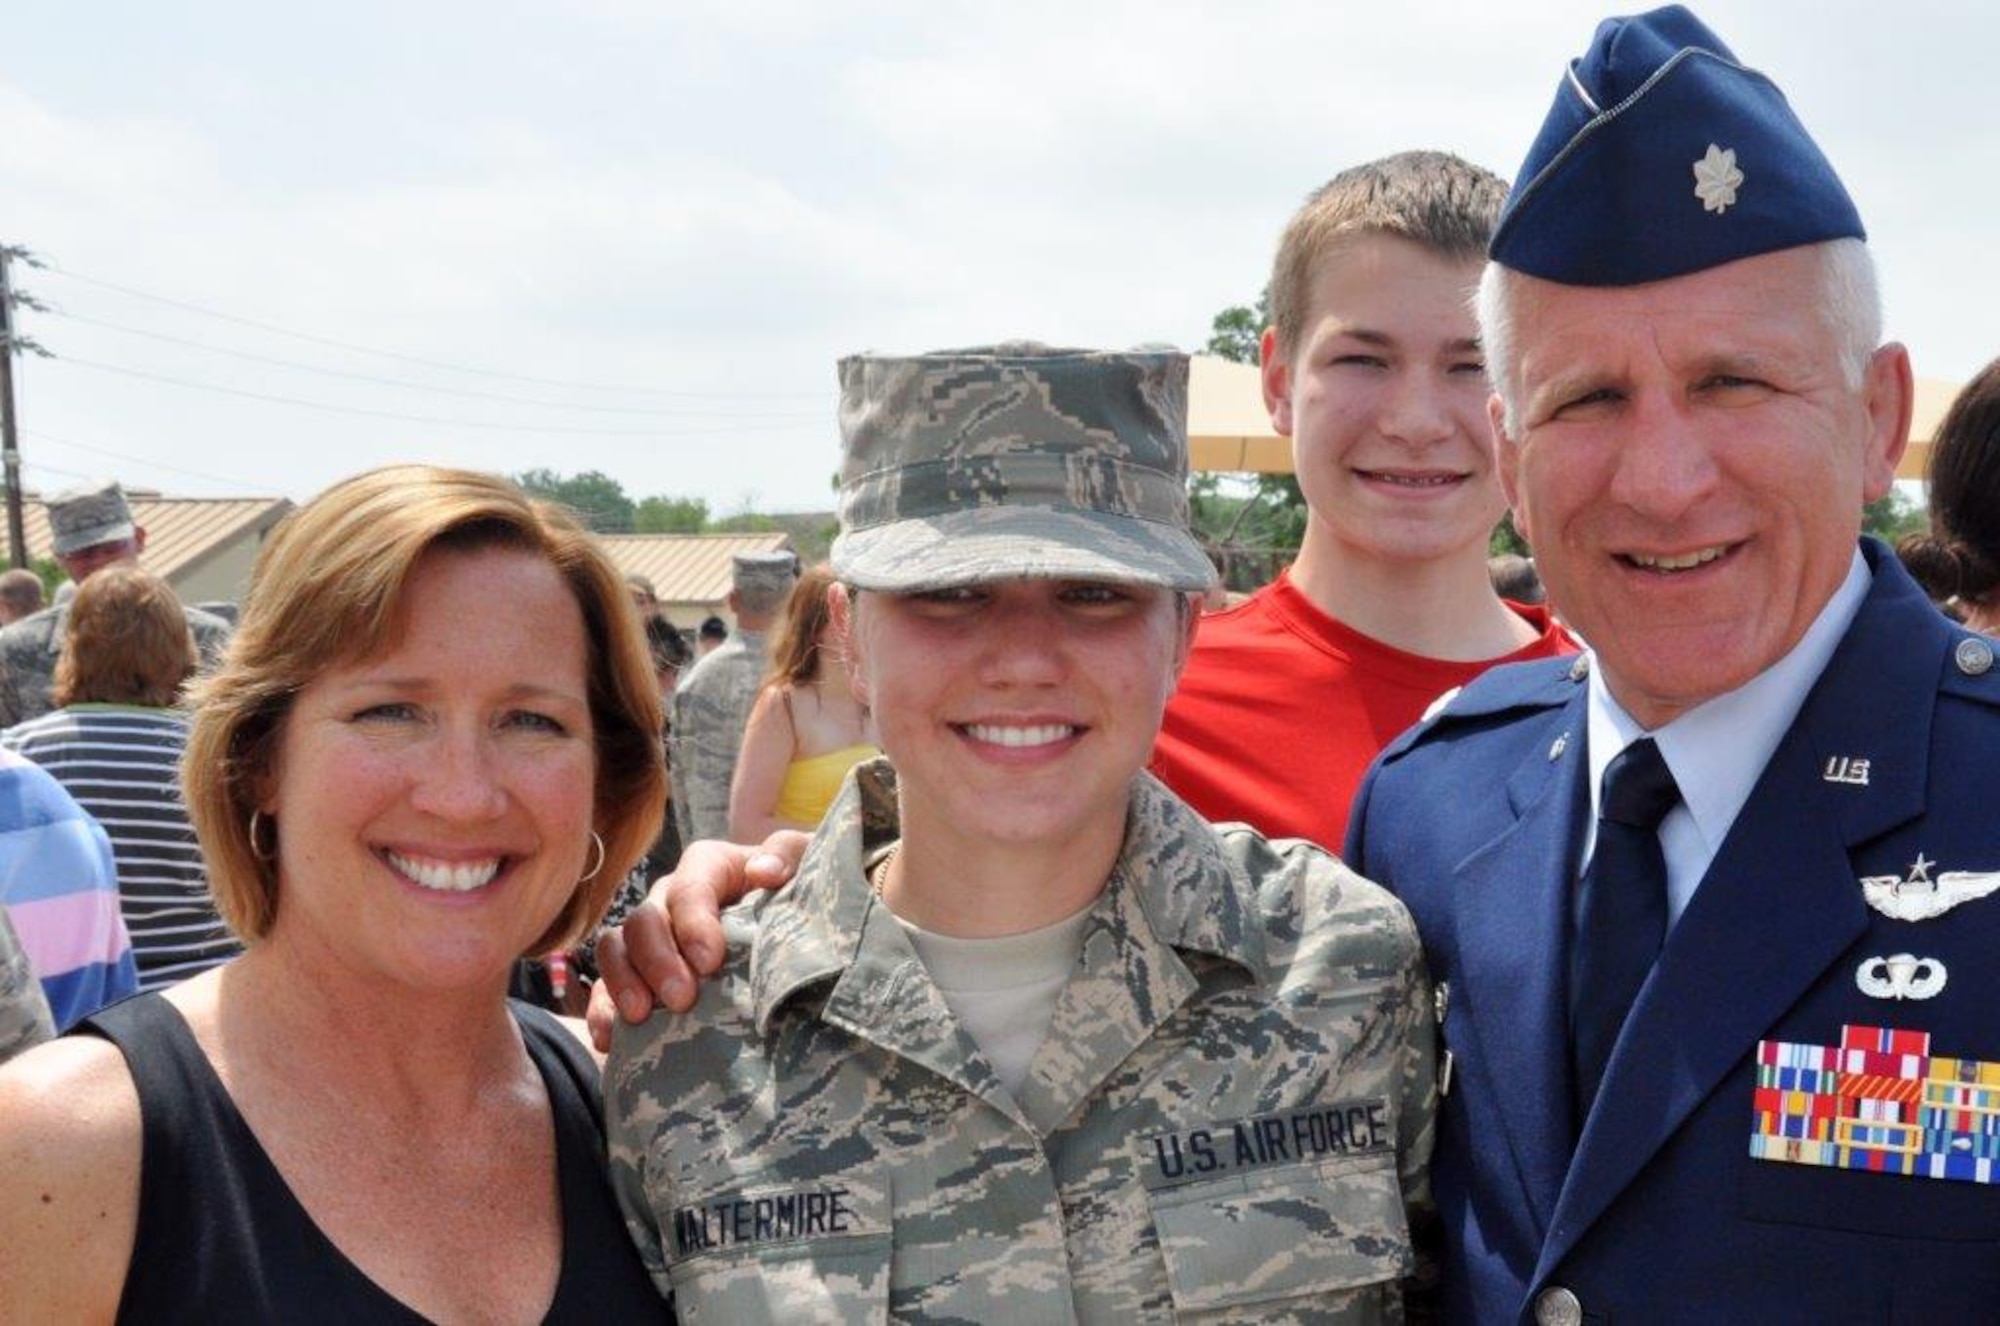 The Waltermire family surrounds Senior Airman Brigette Waltermire after she successfully completed Basic Military Training at Lackland Air Force Base, San Antonio, in 2013. 